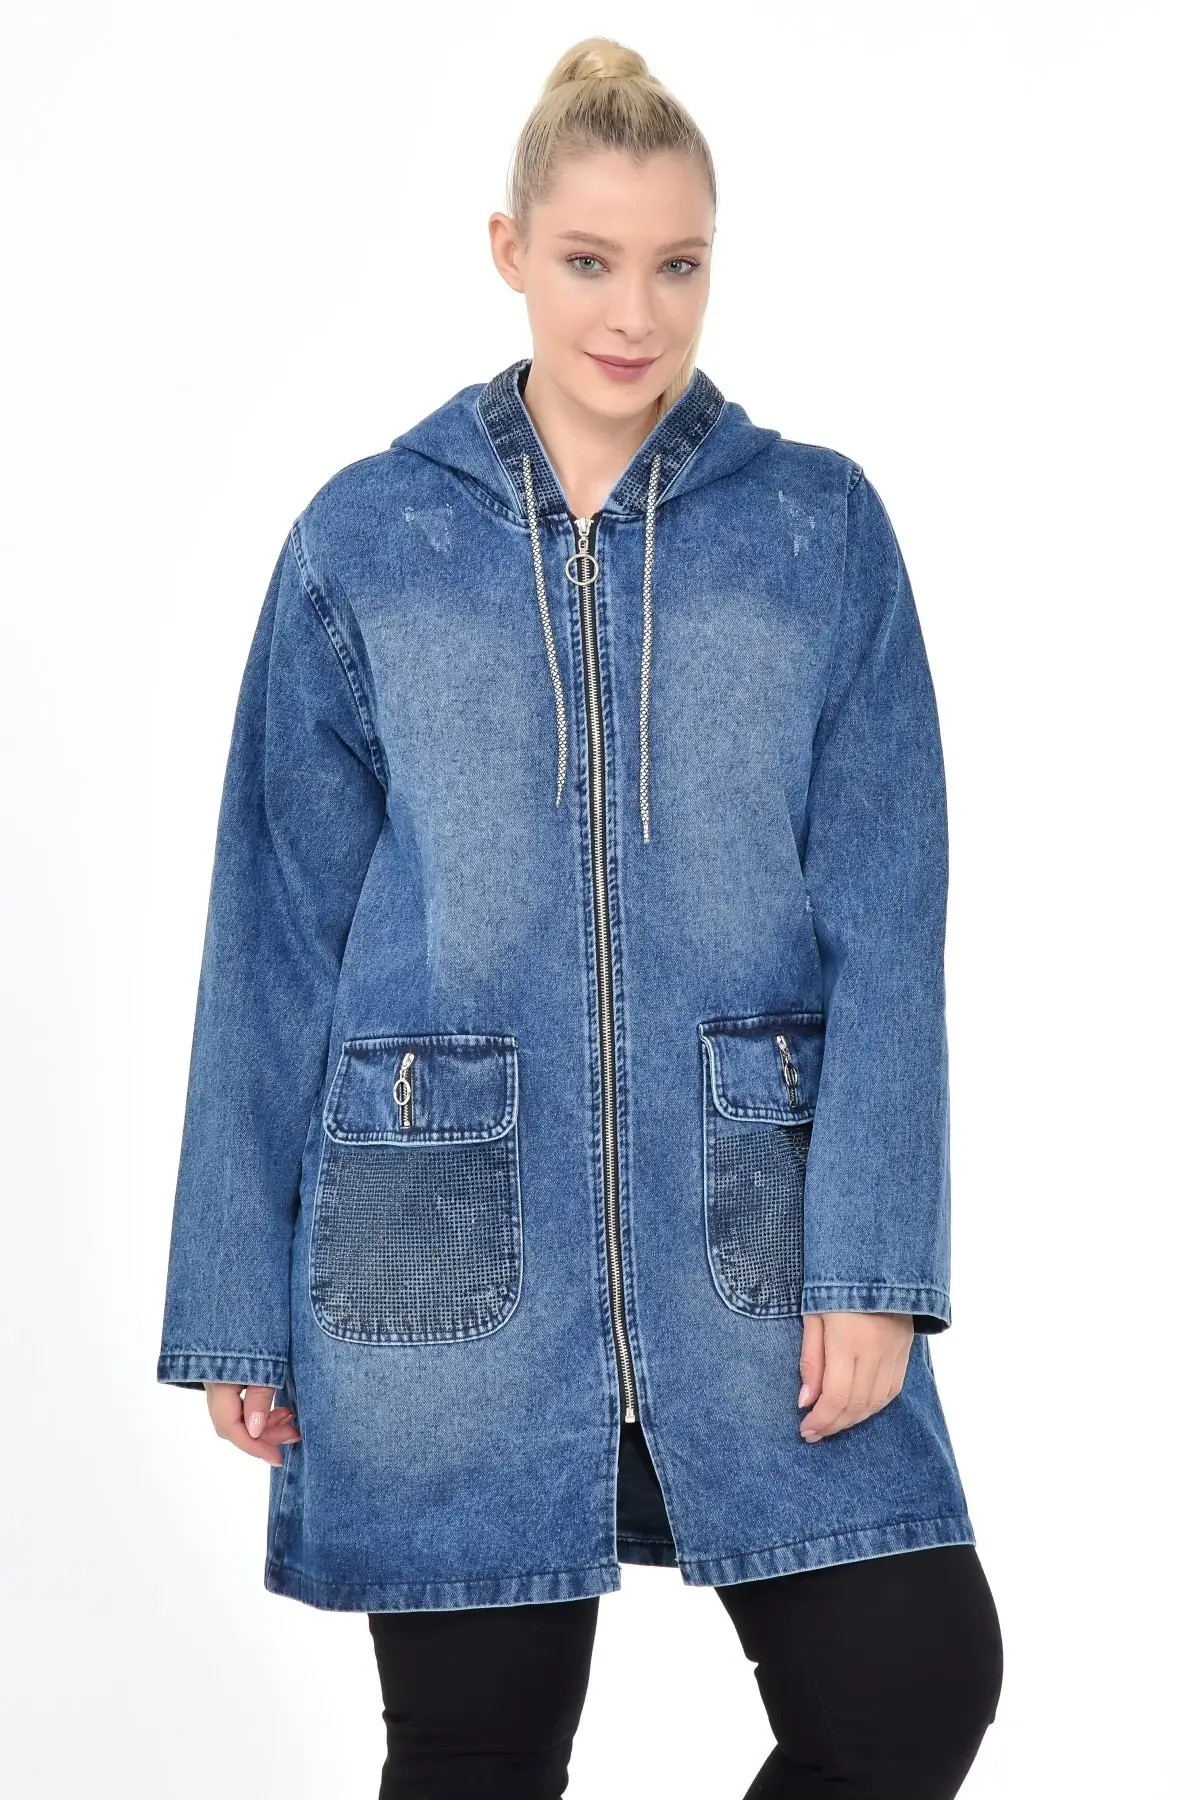 Diaves Plus Size Women Autumn Winter Casual Thick Denim Jacket Loose Hooded Warm Jean Coat Outerwear Turkish Quality